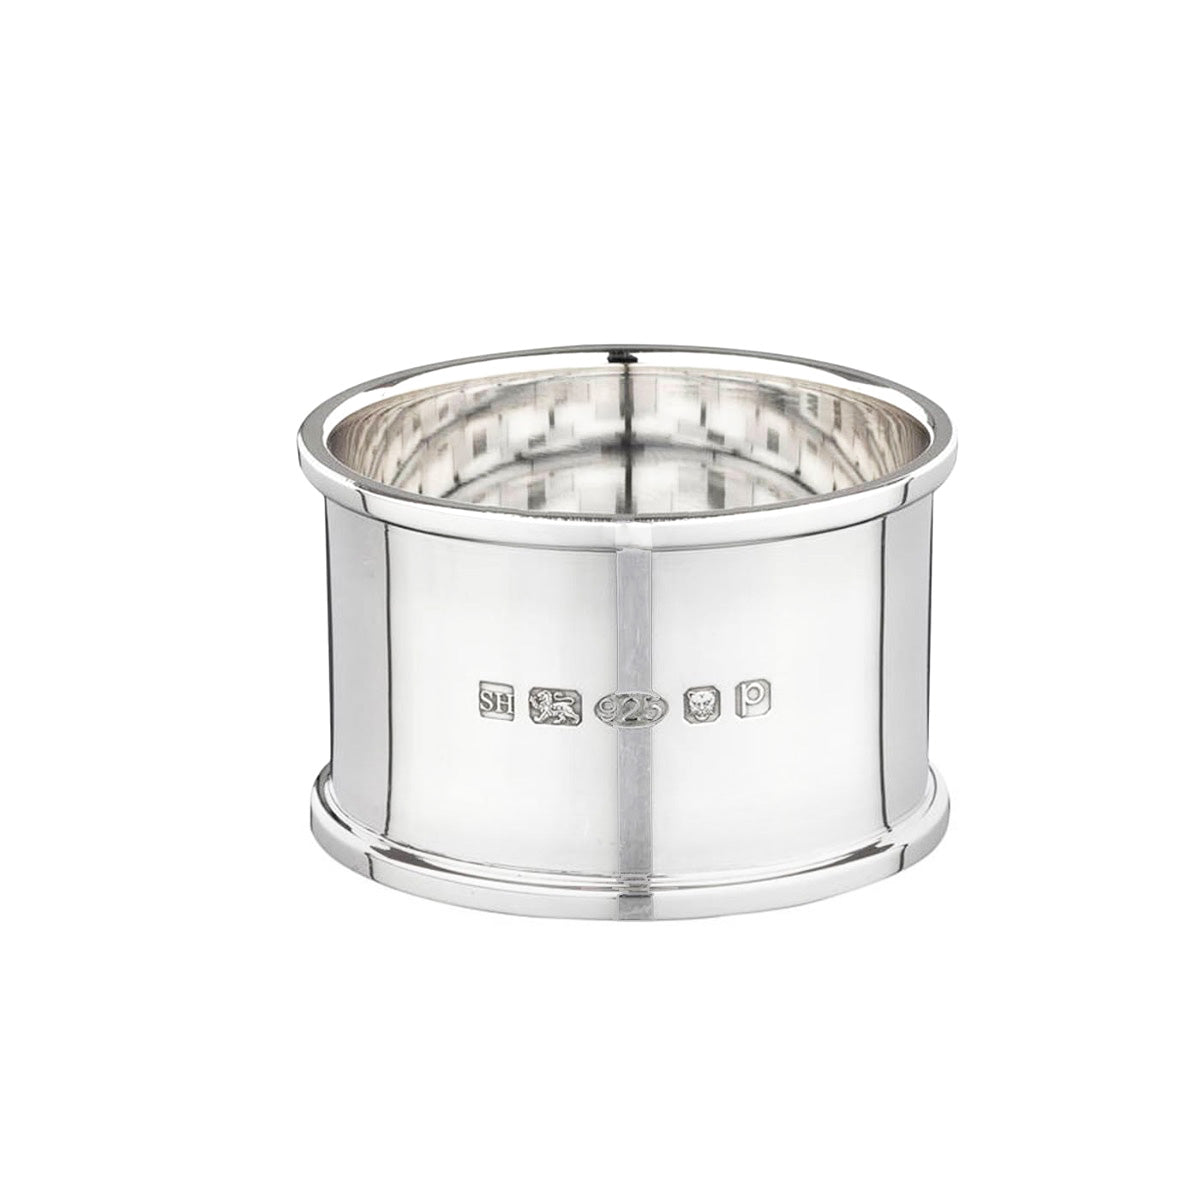 Solid Silver Napkin Ring | Hersey & Son Silversmiths